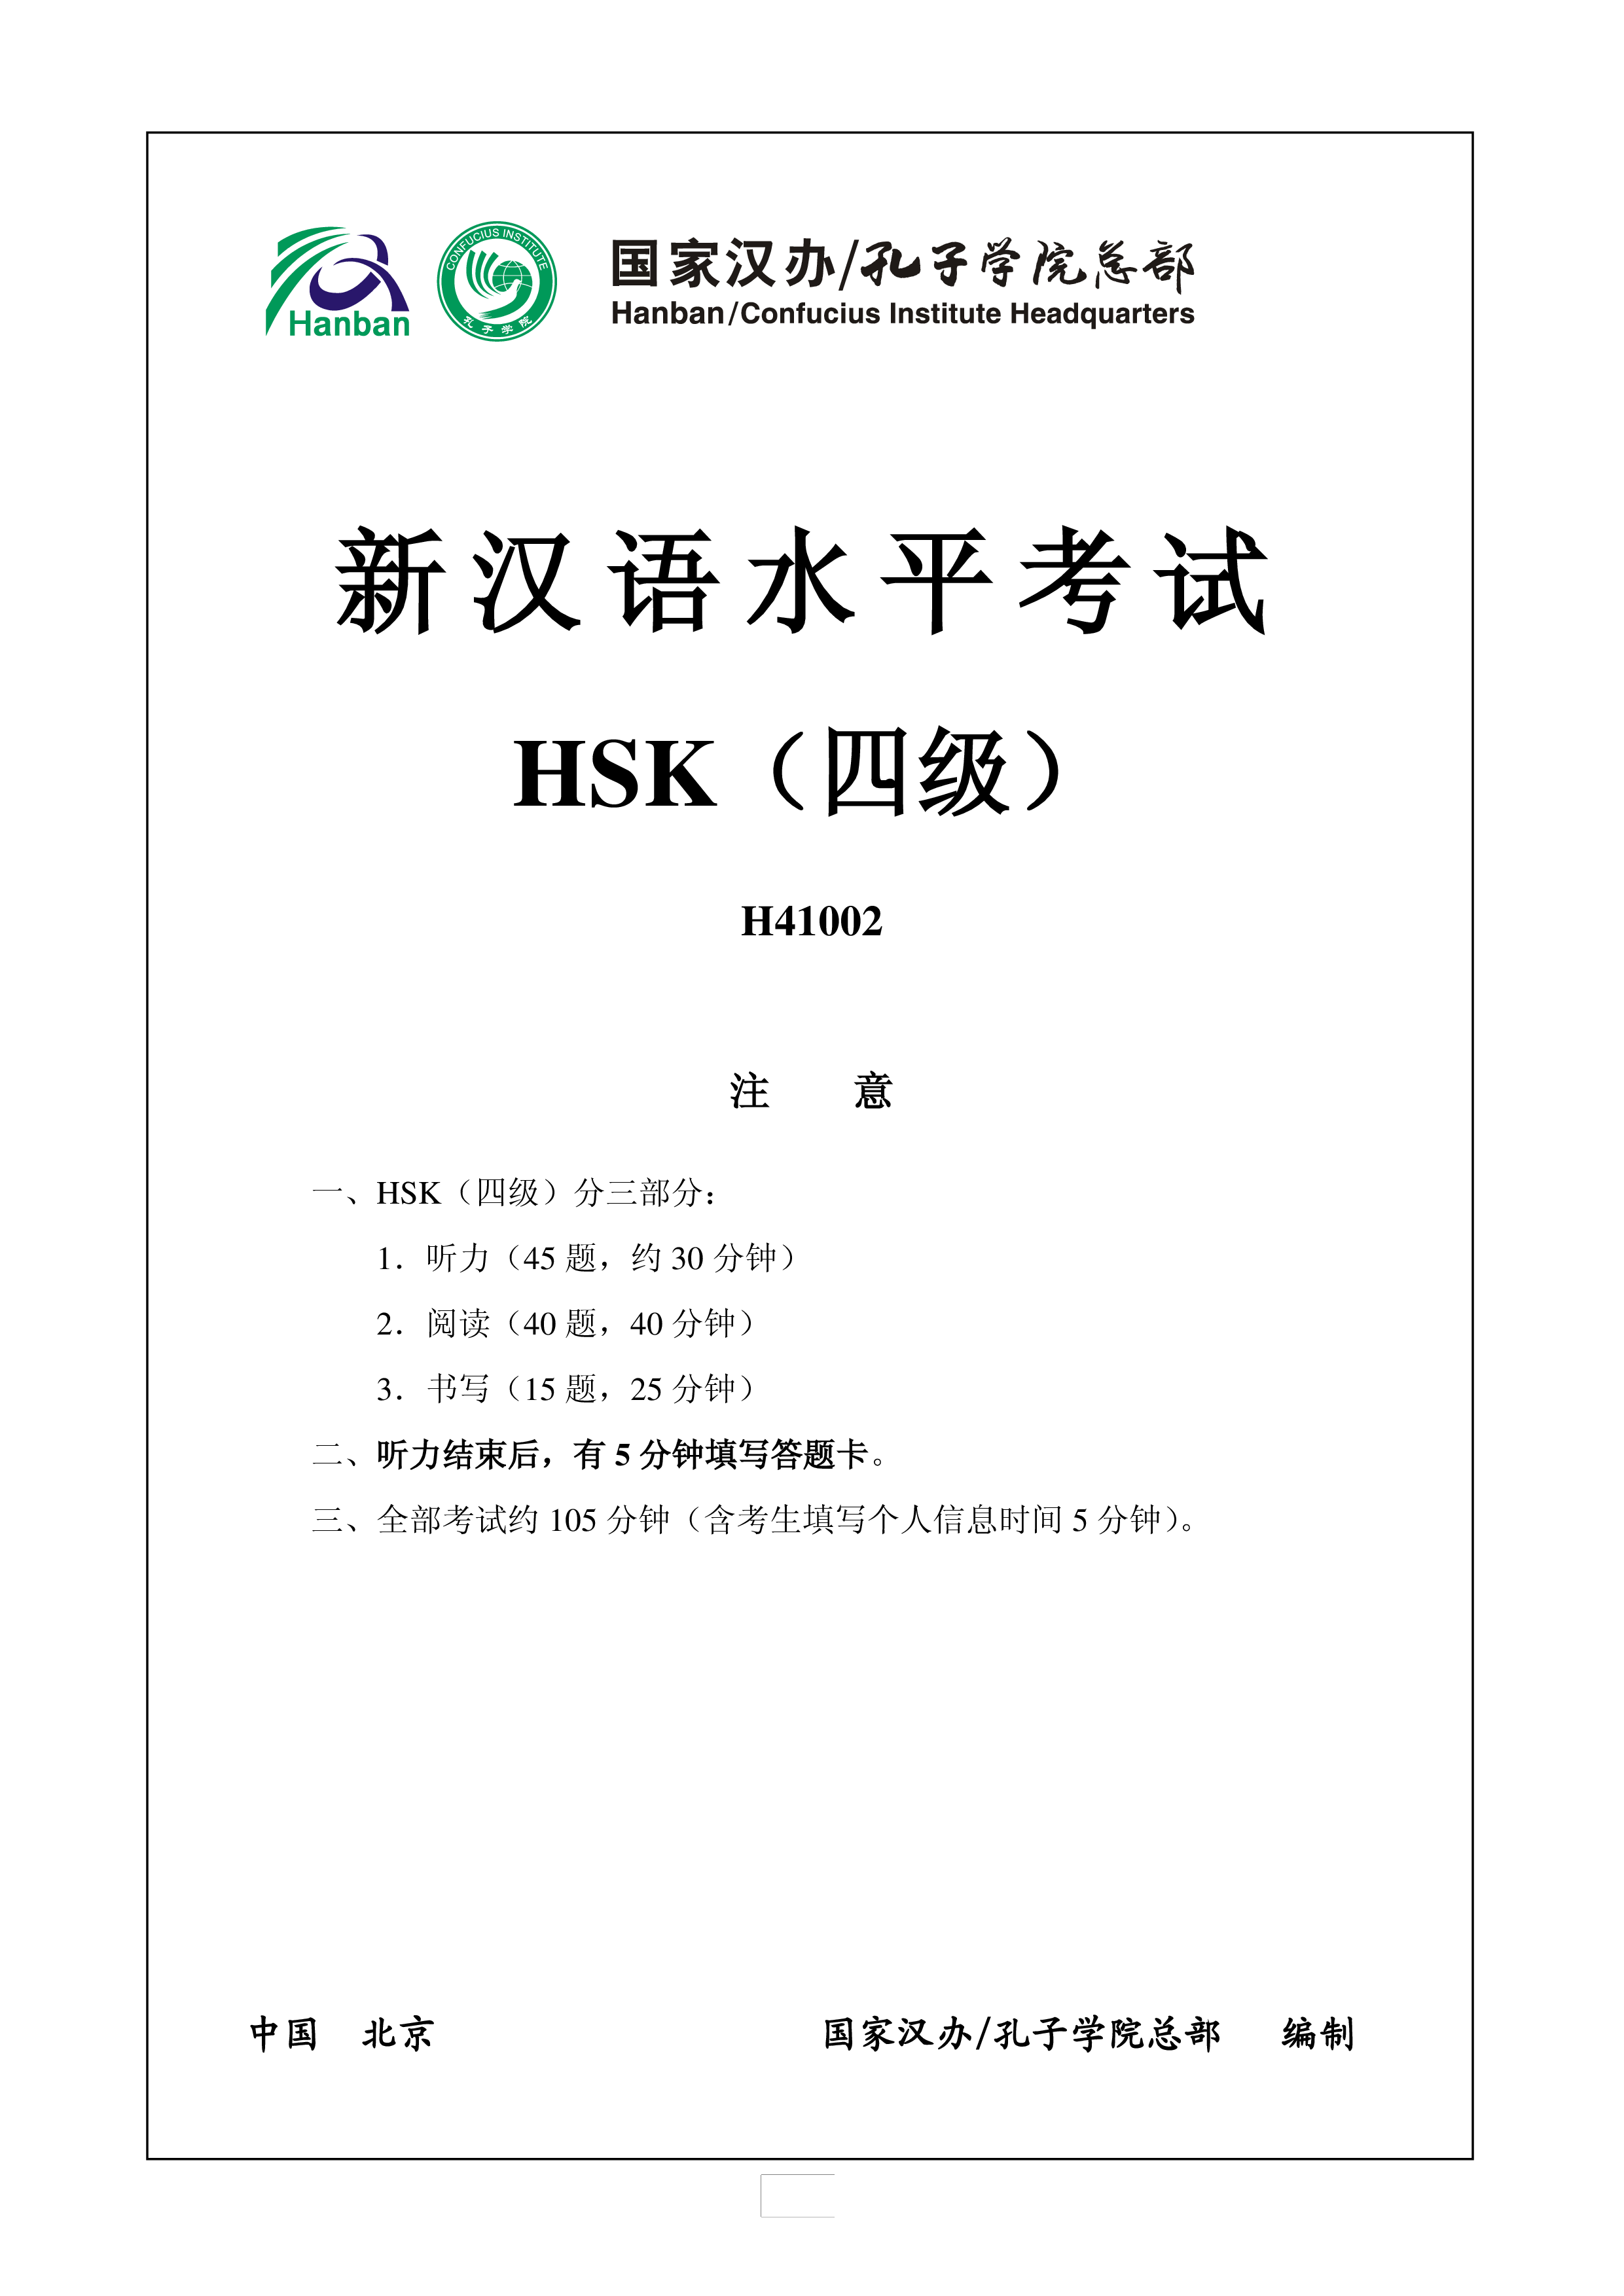 hsk4 chinese exam including answers # hsk h41002 template